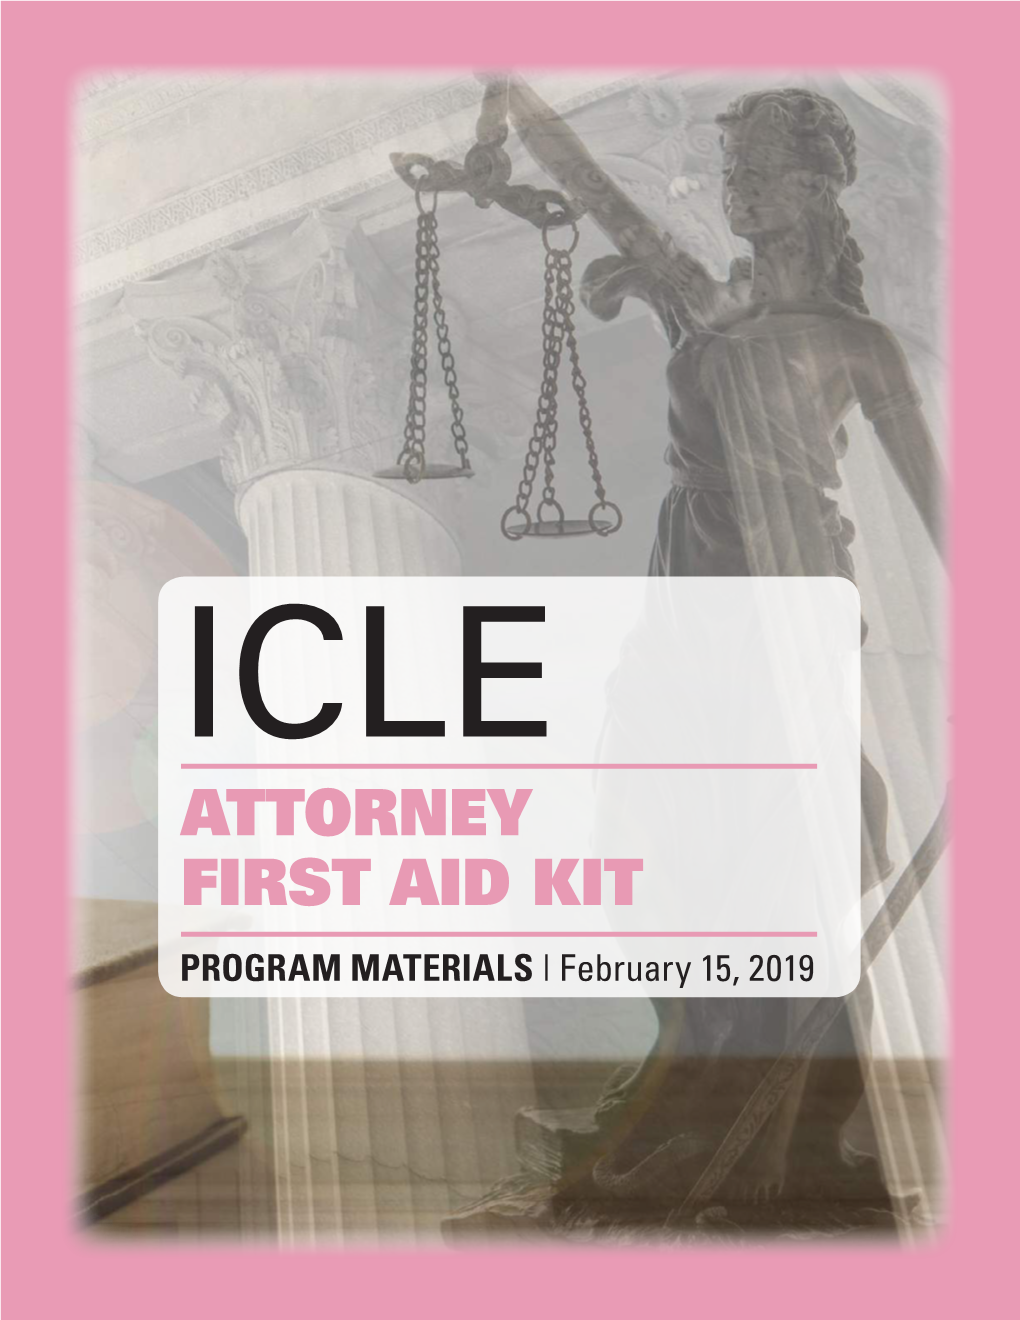 ATTORNEY FIRST AID KIT PROGRAM MATERIALS | February 15, 2019 Friday, February 15, 2019 ICLE: State Bar Series